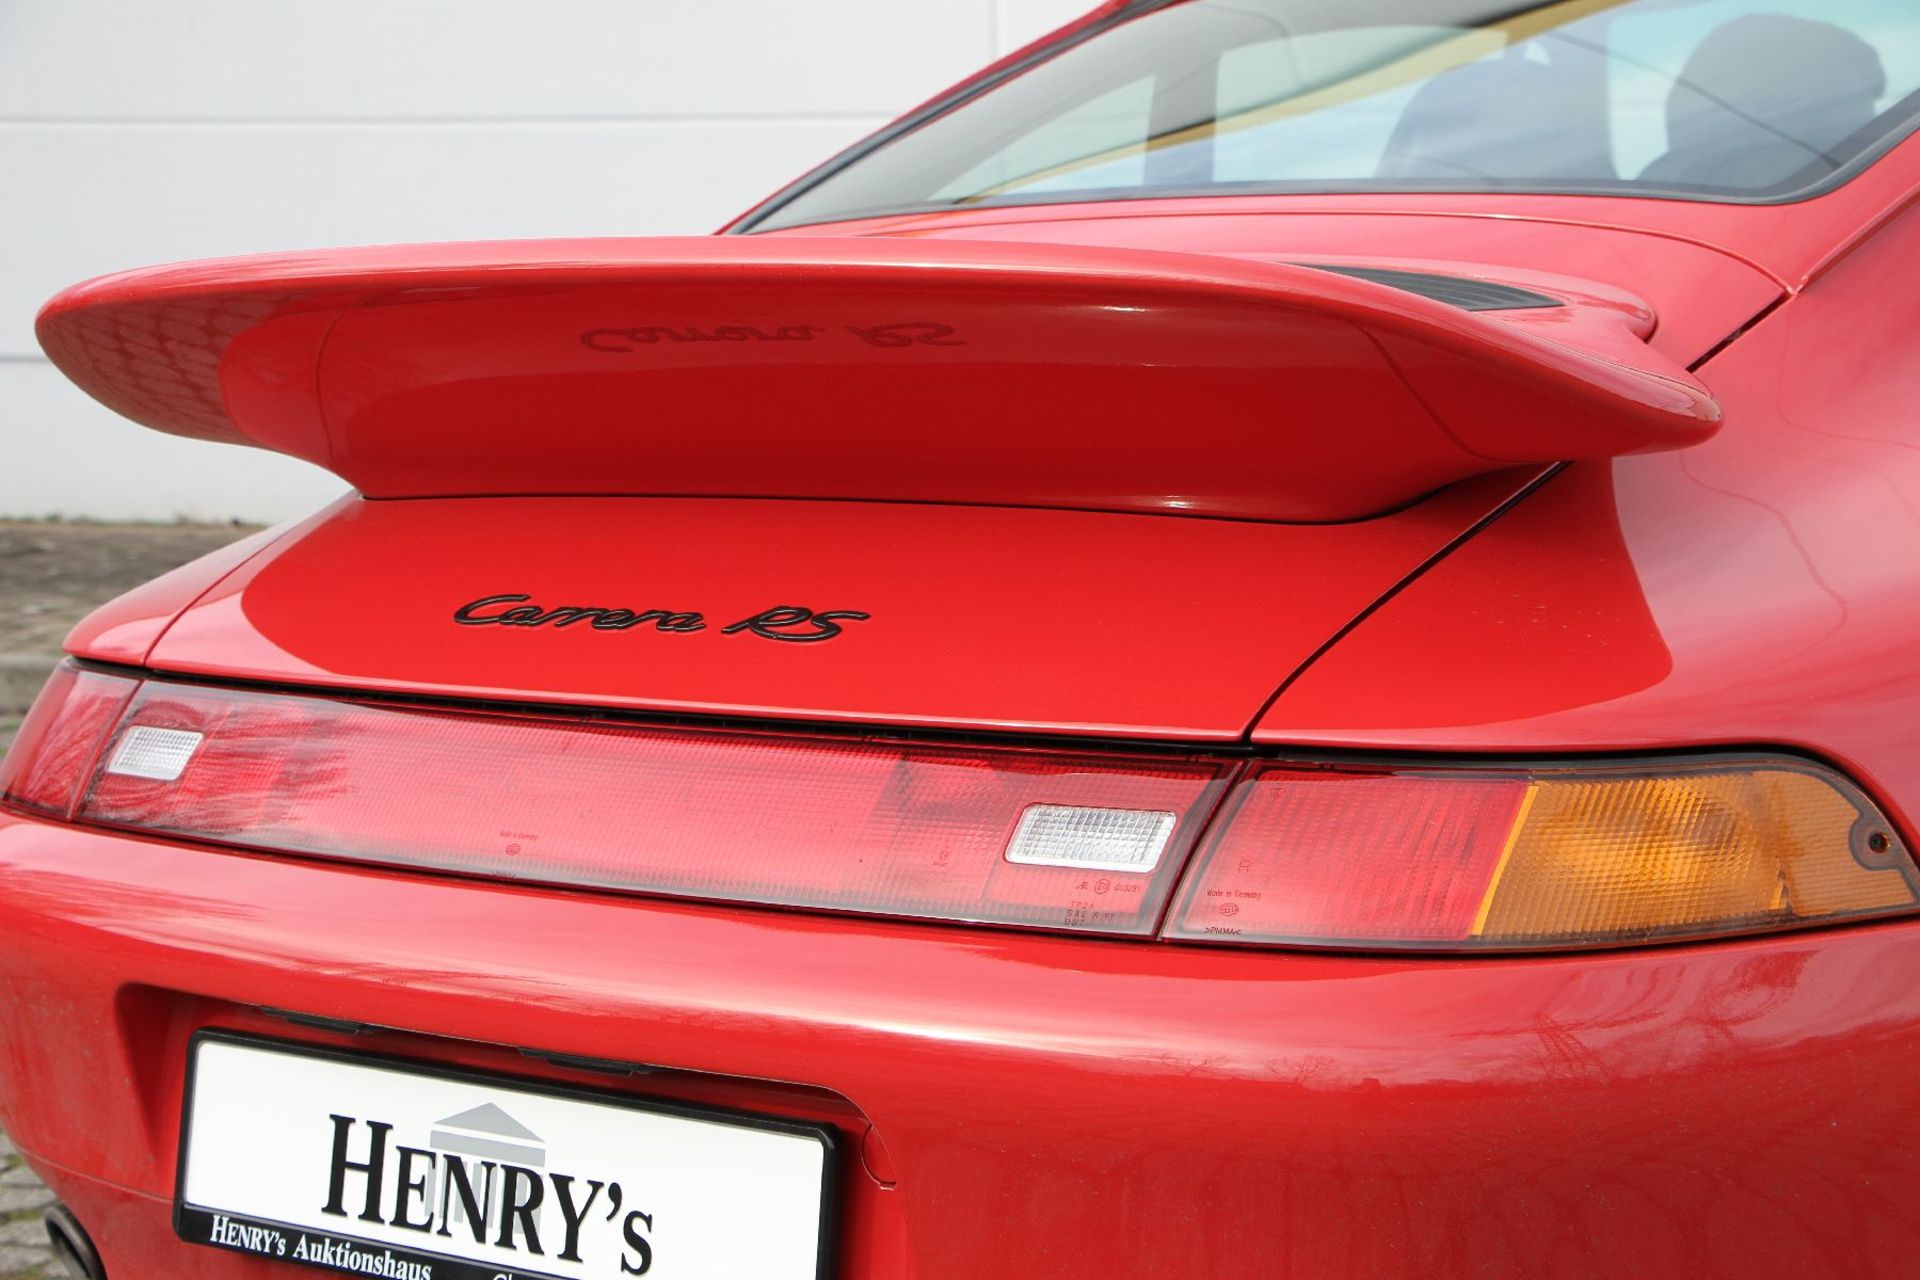 Porsche 911 Carrera RS 993, Chassis Number: WP0ZZZ99ZTS390517, first registered 08/1995, two owners, - Bild 6 aus 15